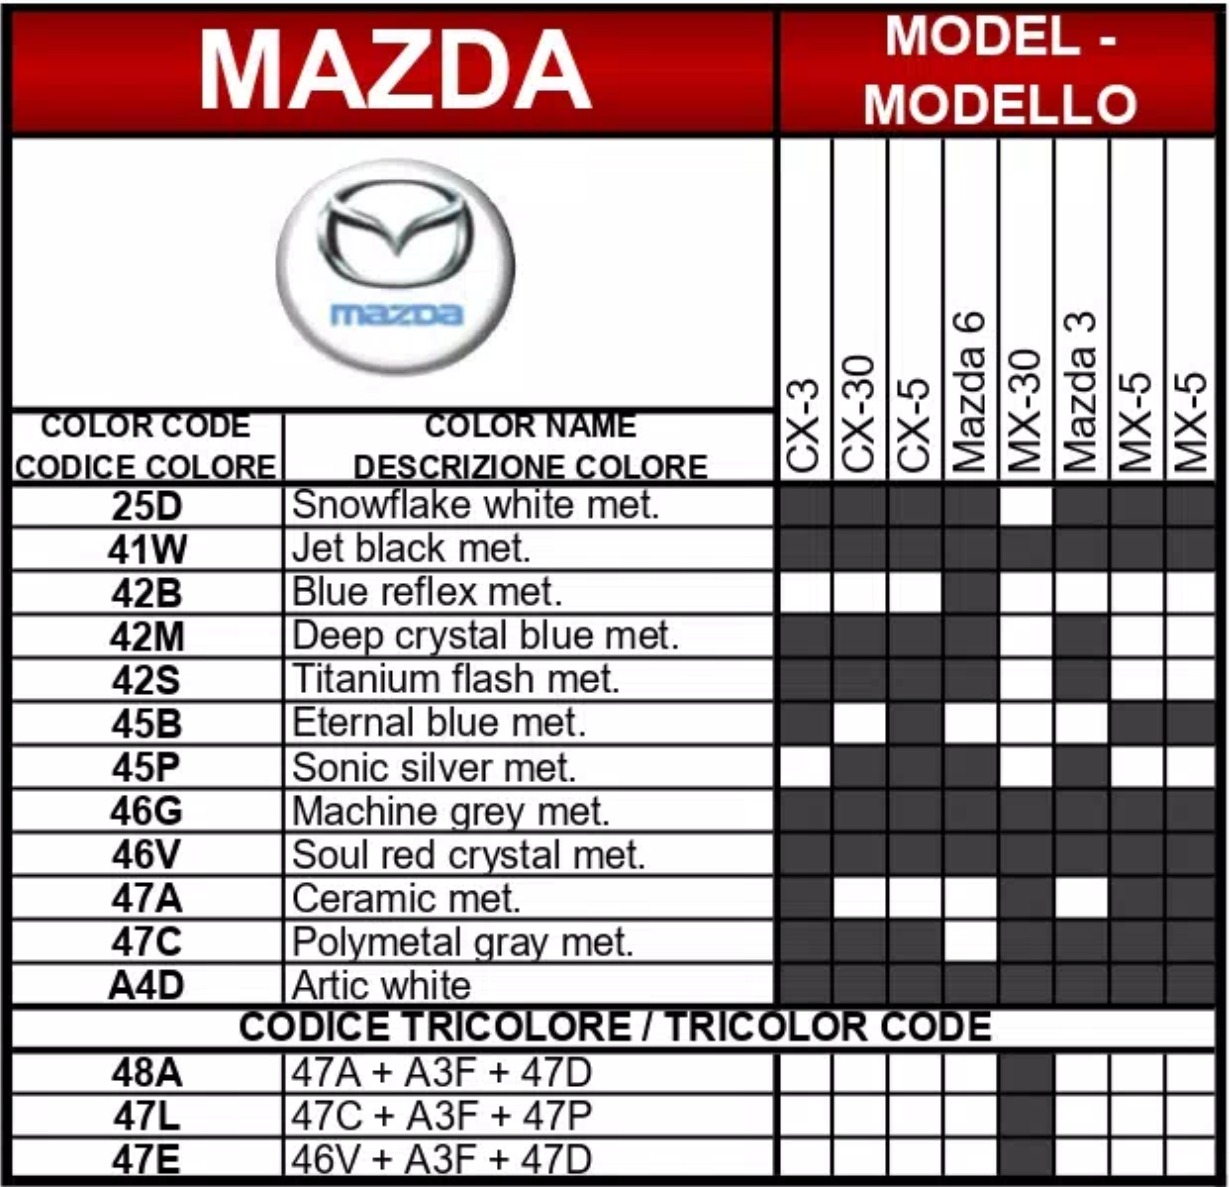 A chart showing what paint codes and their color names go to which vehicle for Mazda automobiles in 2021